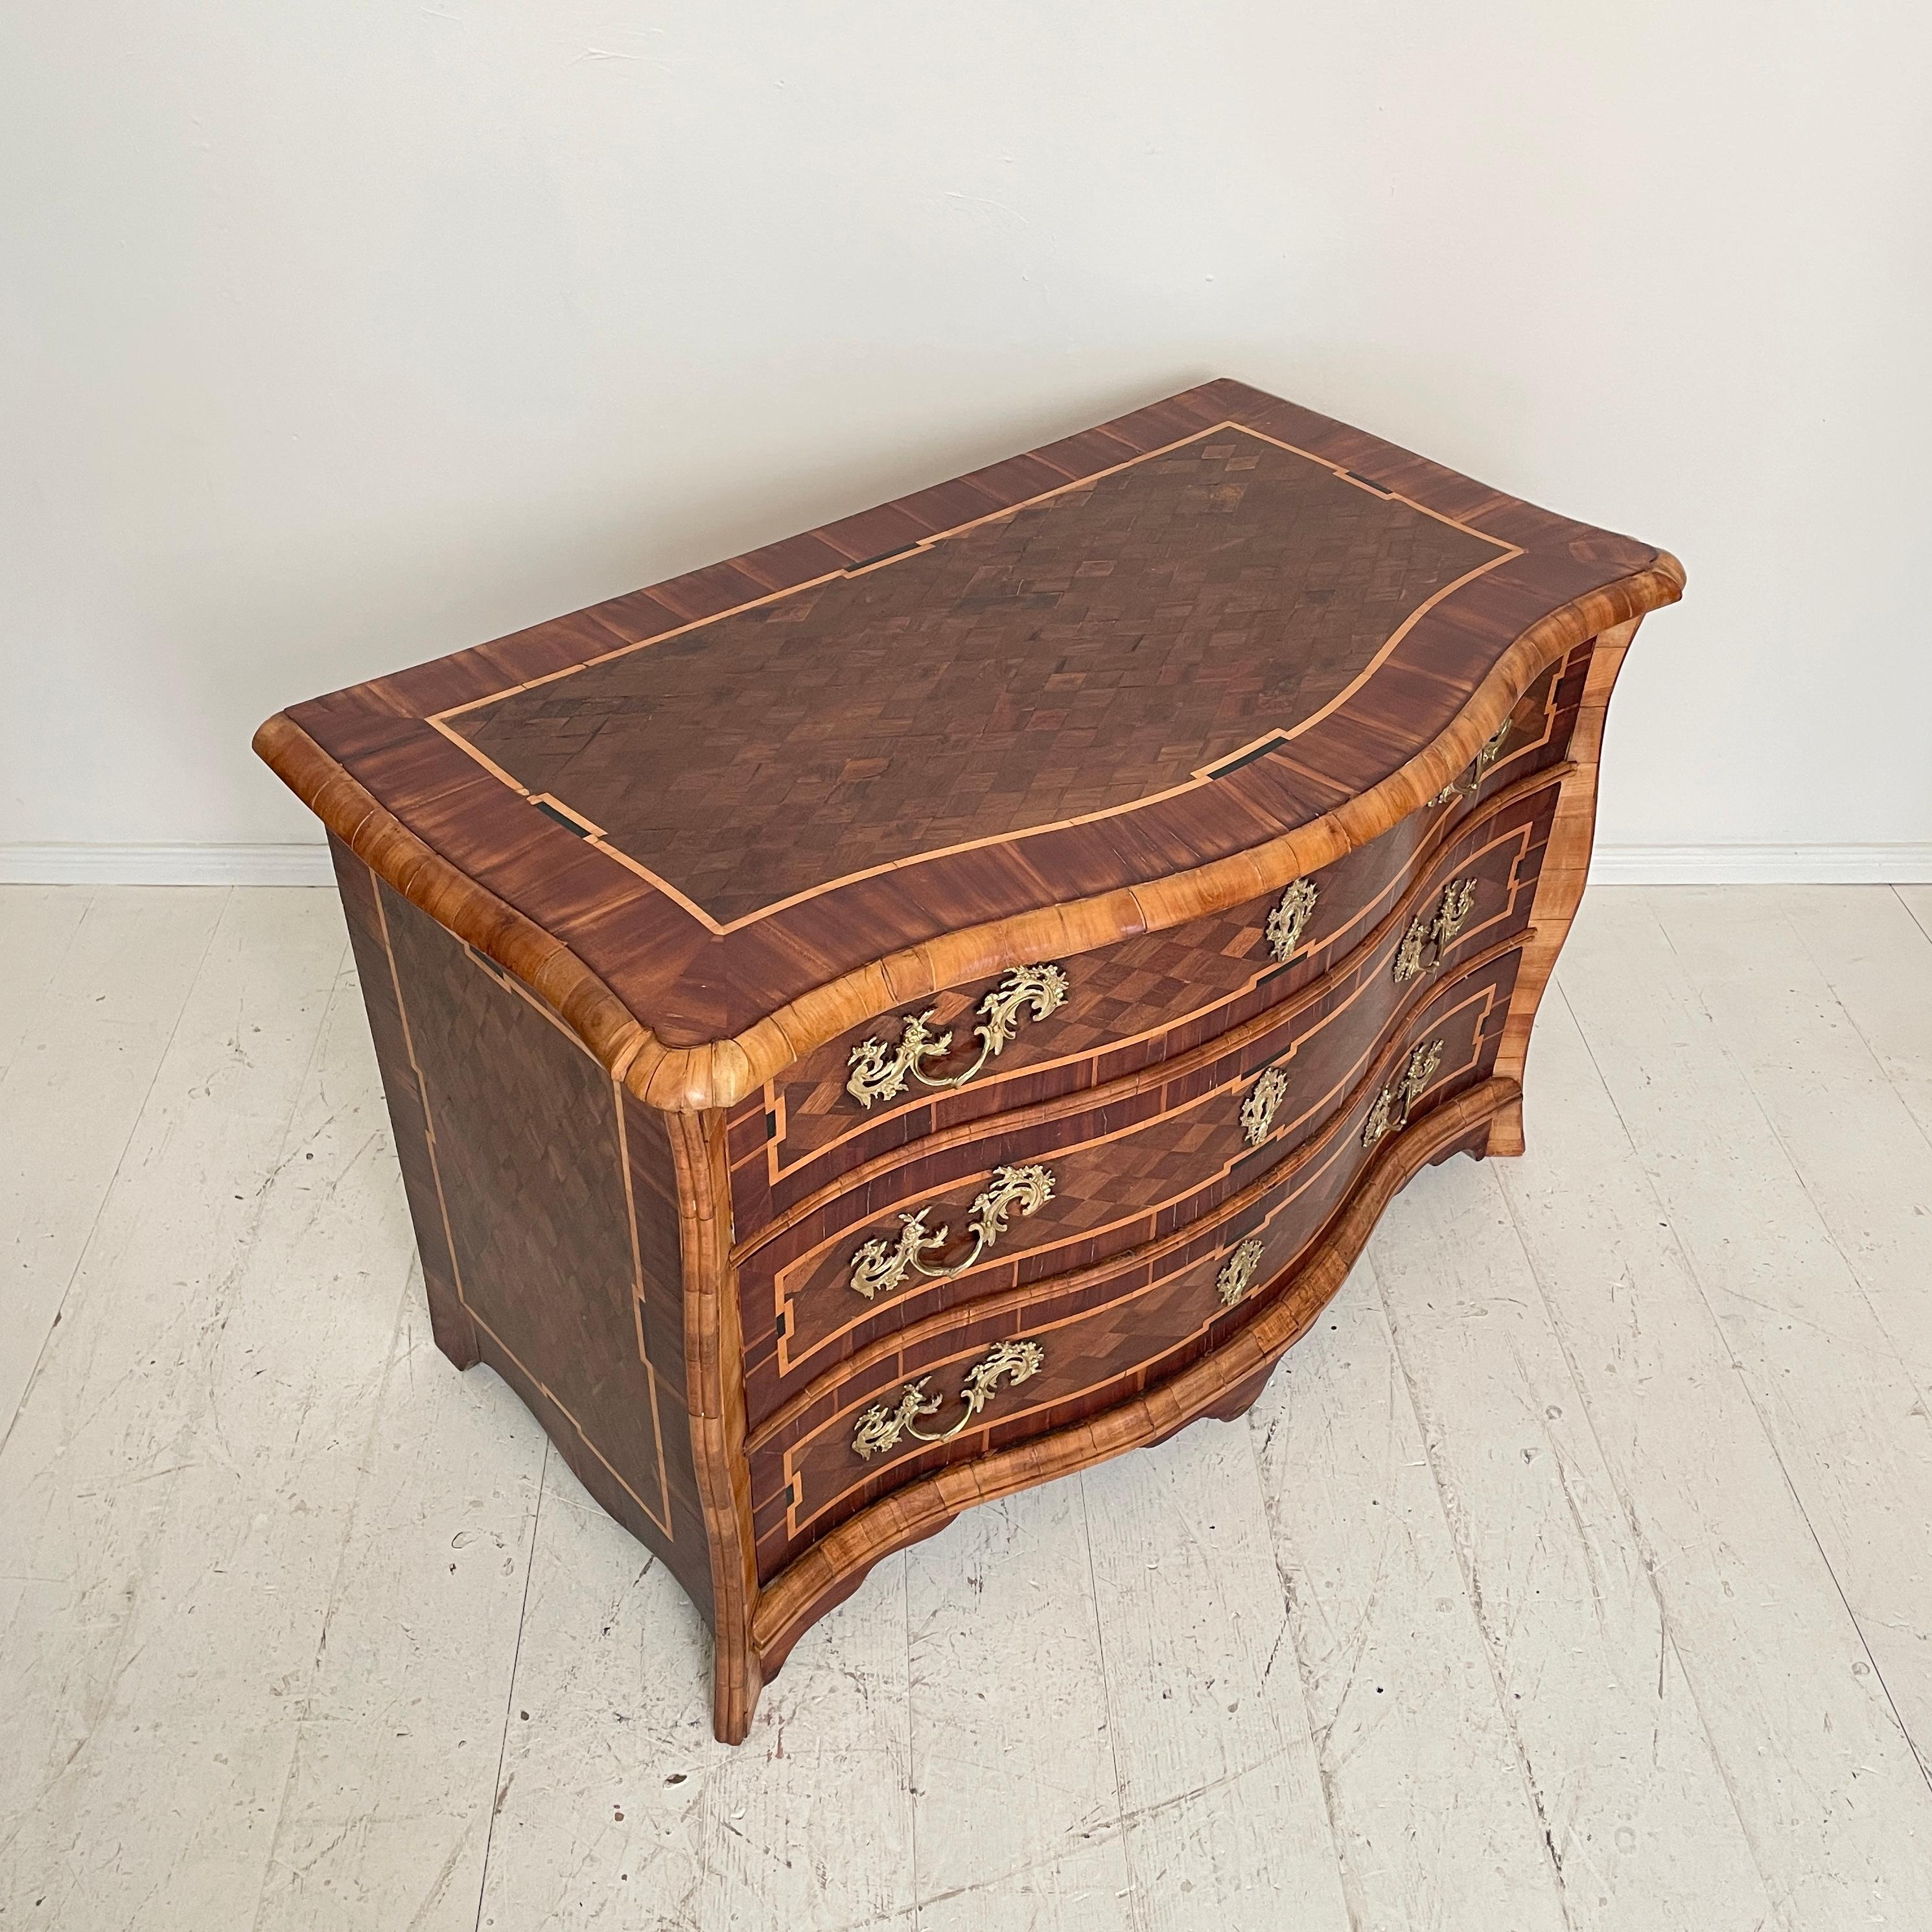 18th Century Dresdner Baroque Commode in Brown Walnut and Amaranth, Around 1760 For Sale 5